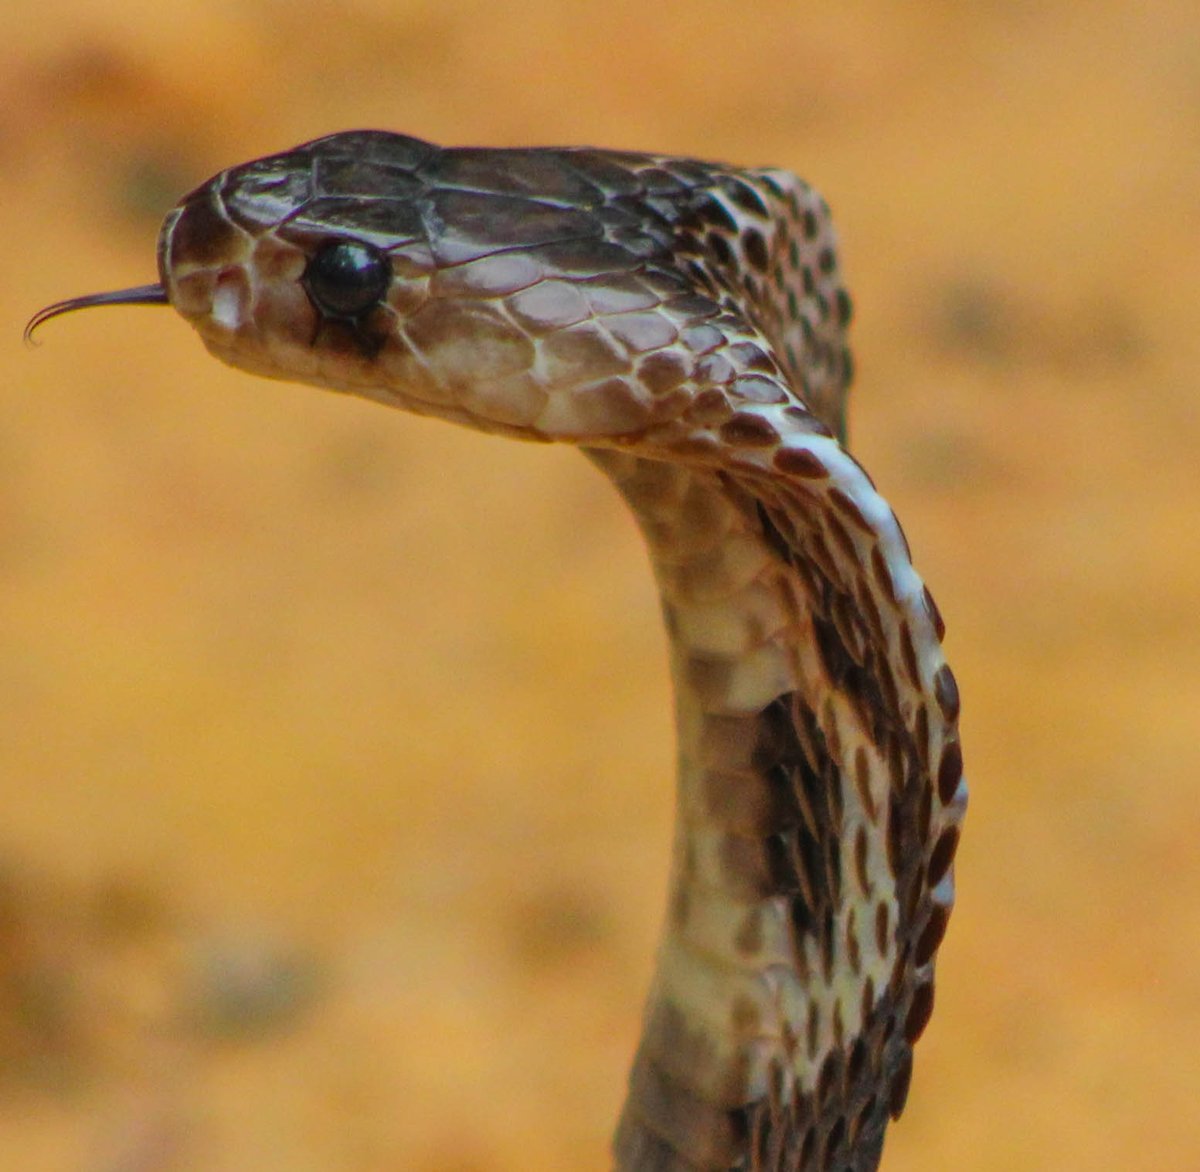 2. Cobra (නයා/நல்ல பாம்பு)This is one snake probably everyone familiar with because of the hooded shape of their head. Cobras are found right throughout the island. There are numerous myths and cultural beliefs found in the country about Cobra. #lka  #snakes  #biodiversity /9